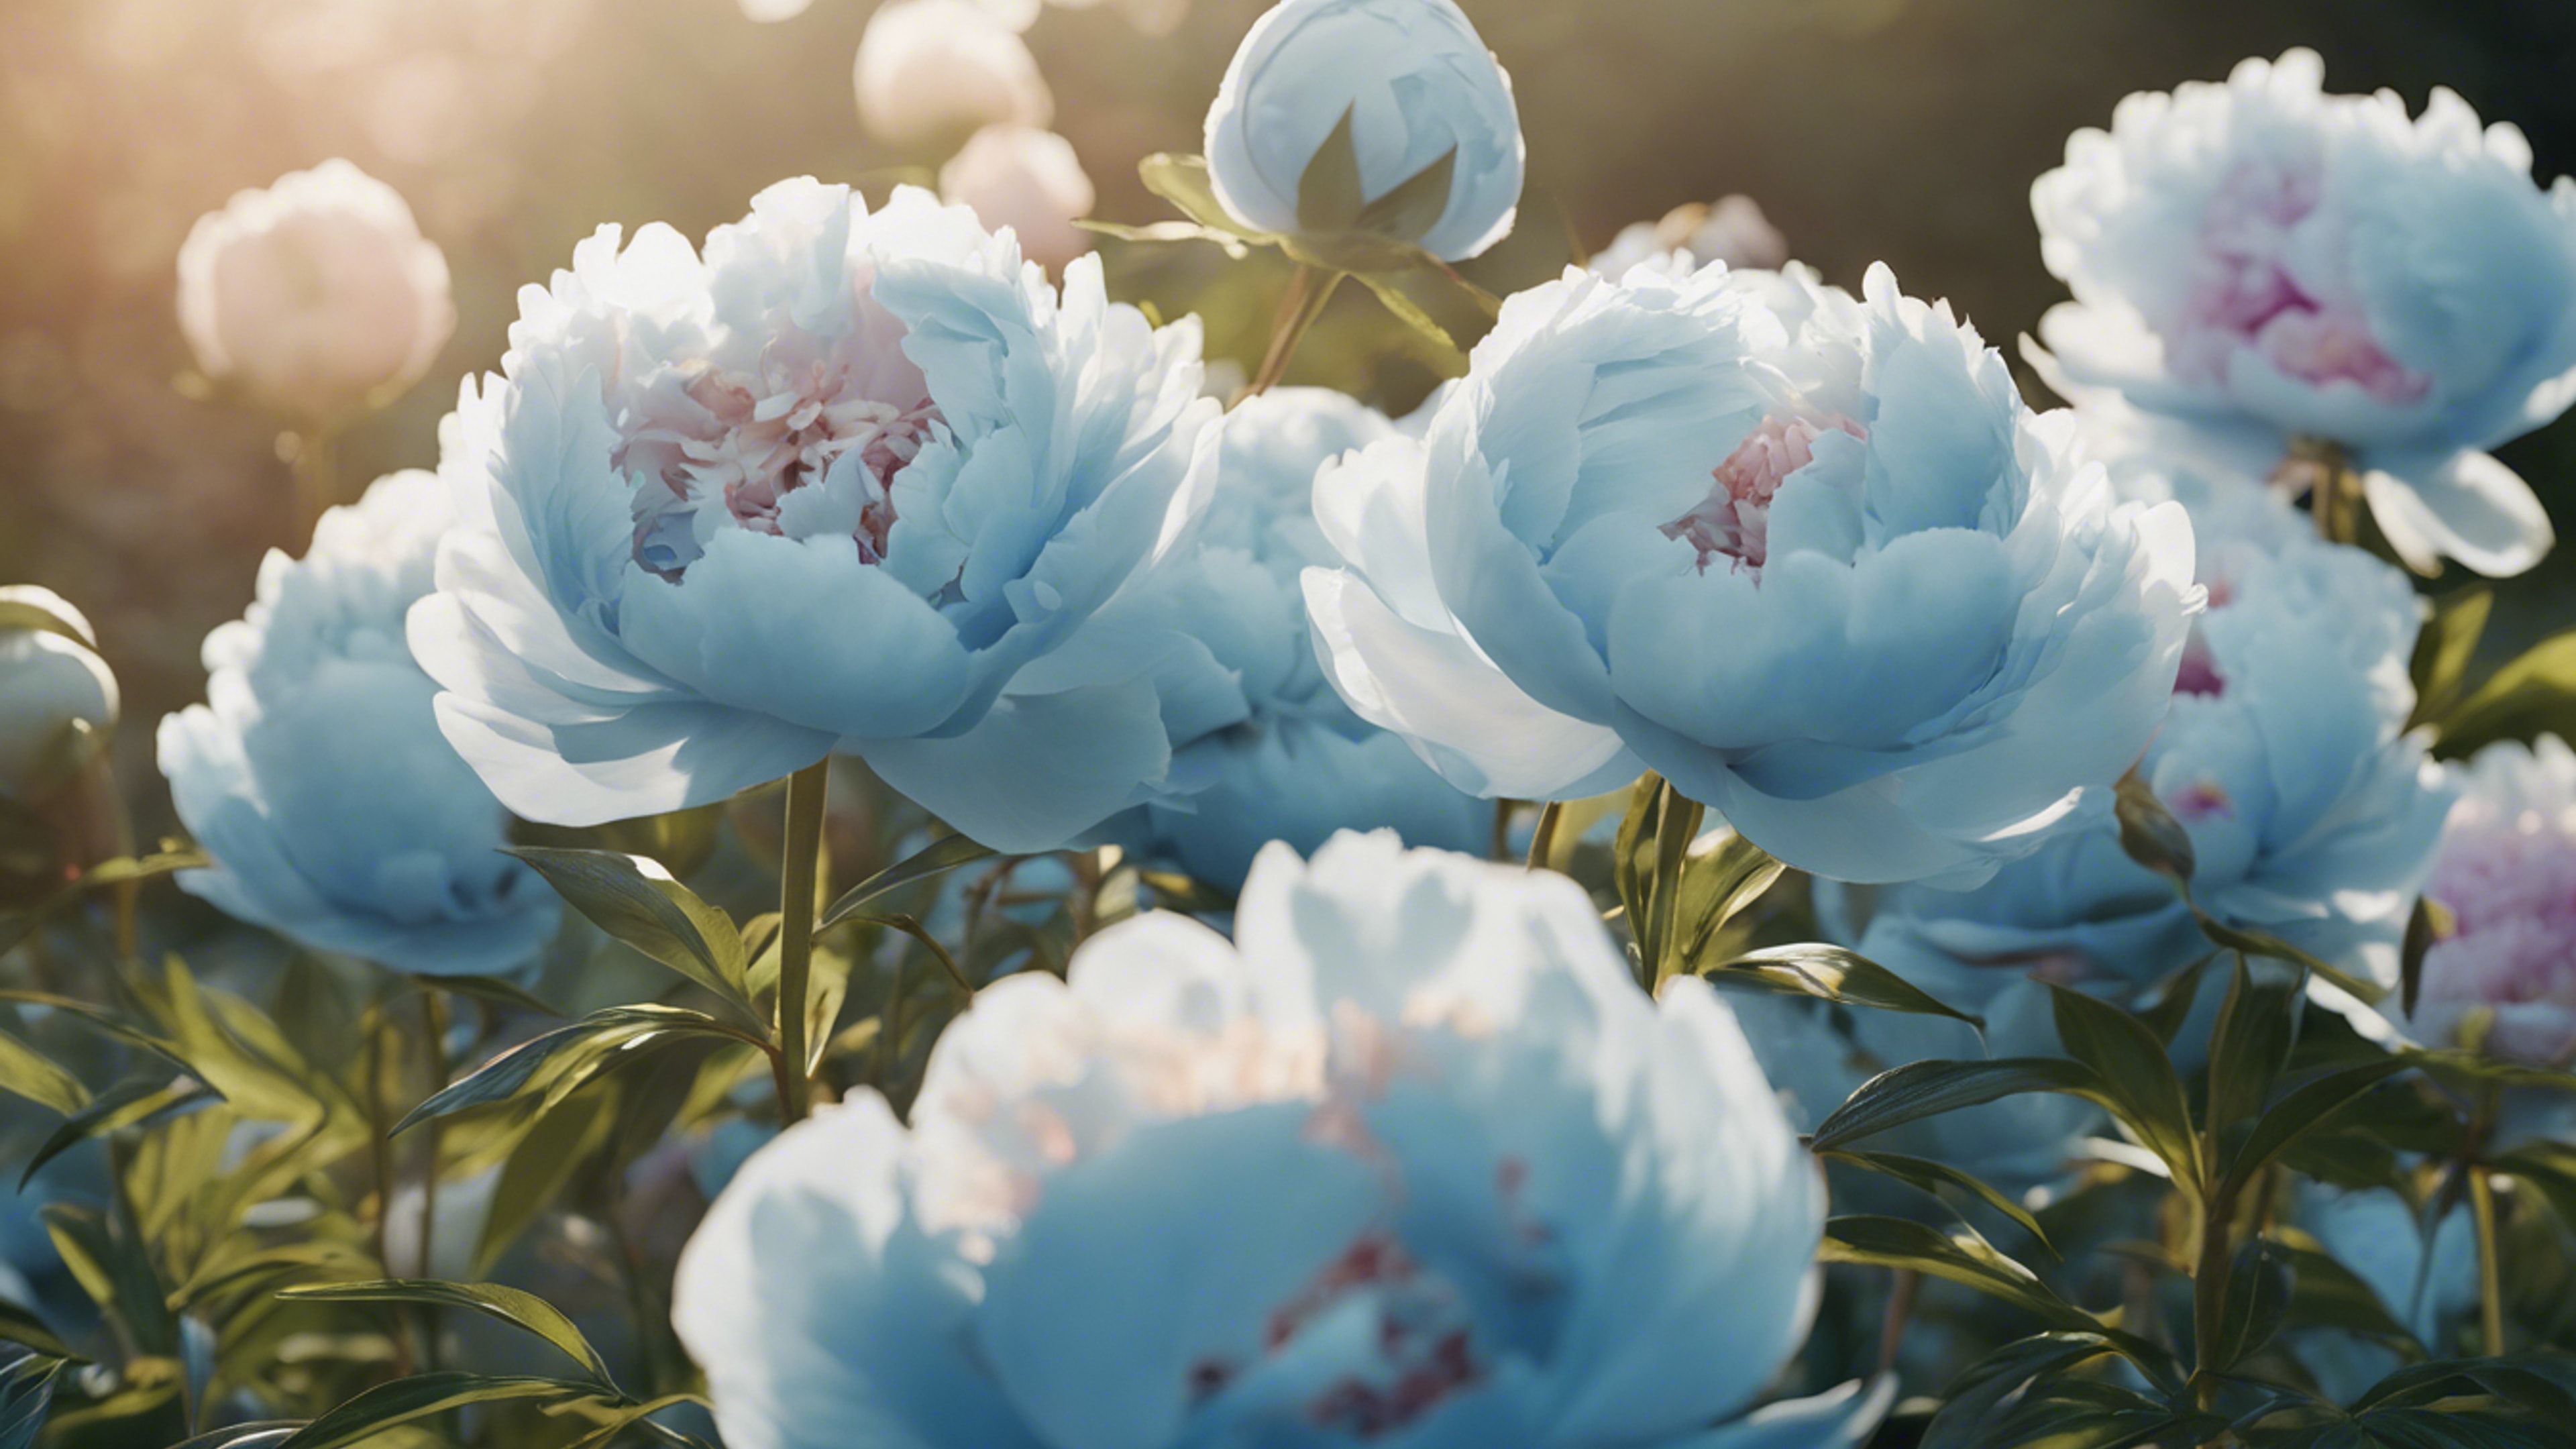 An array of pastel blue peonies blooming in a sunlit garden. Hintergrund[bebed2869b0c4244859a]